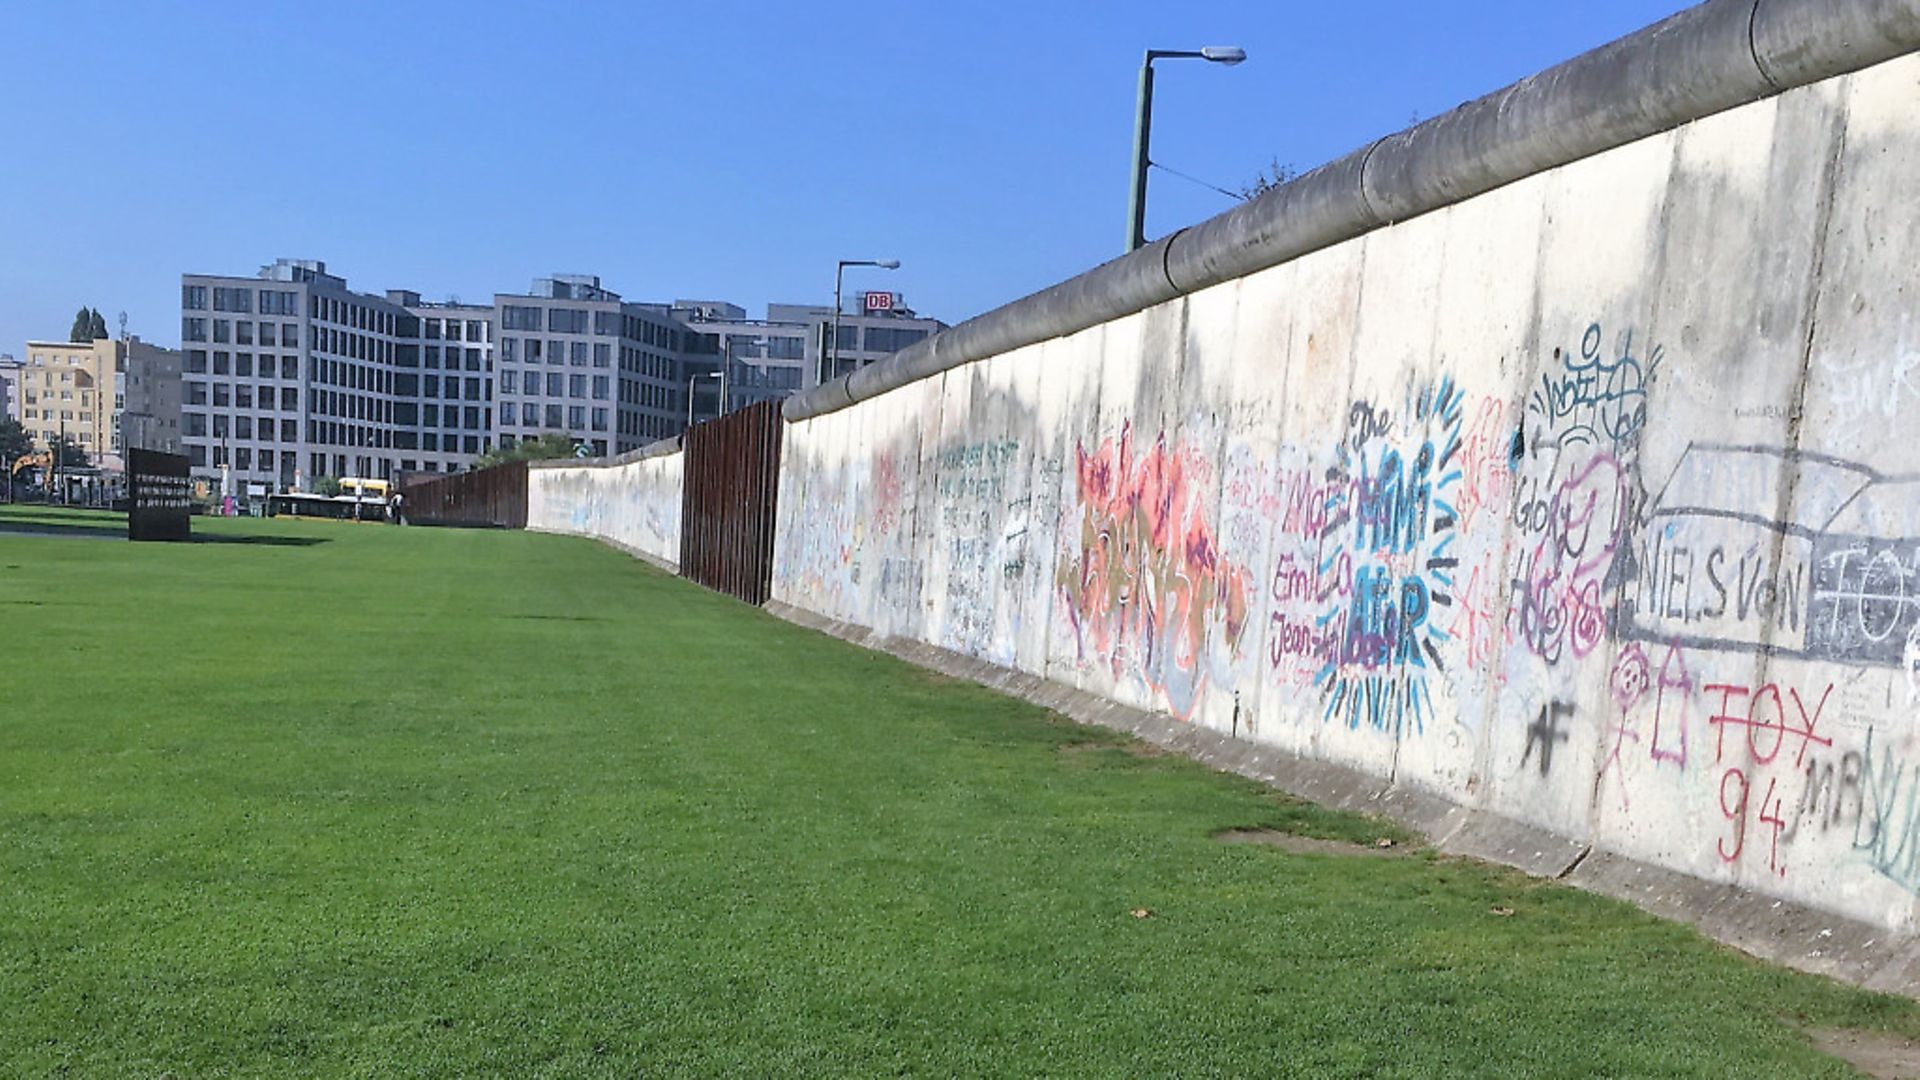 A surviving section of the Berlin Wall, which is now in a memorial park. - Credit: Archant